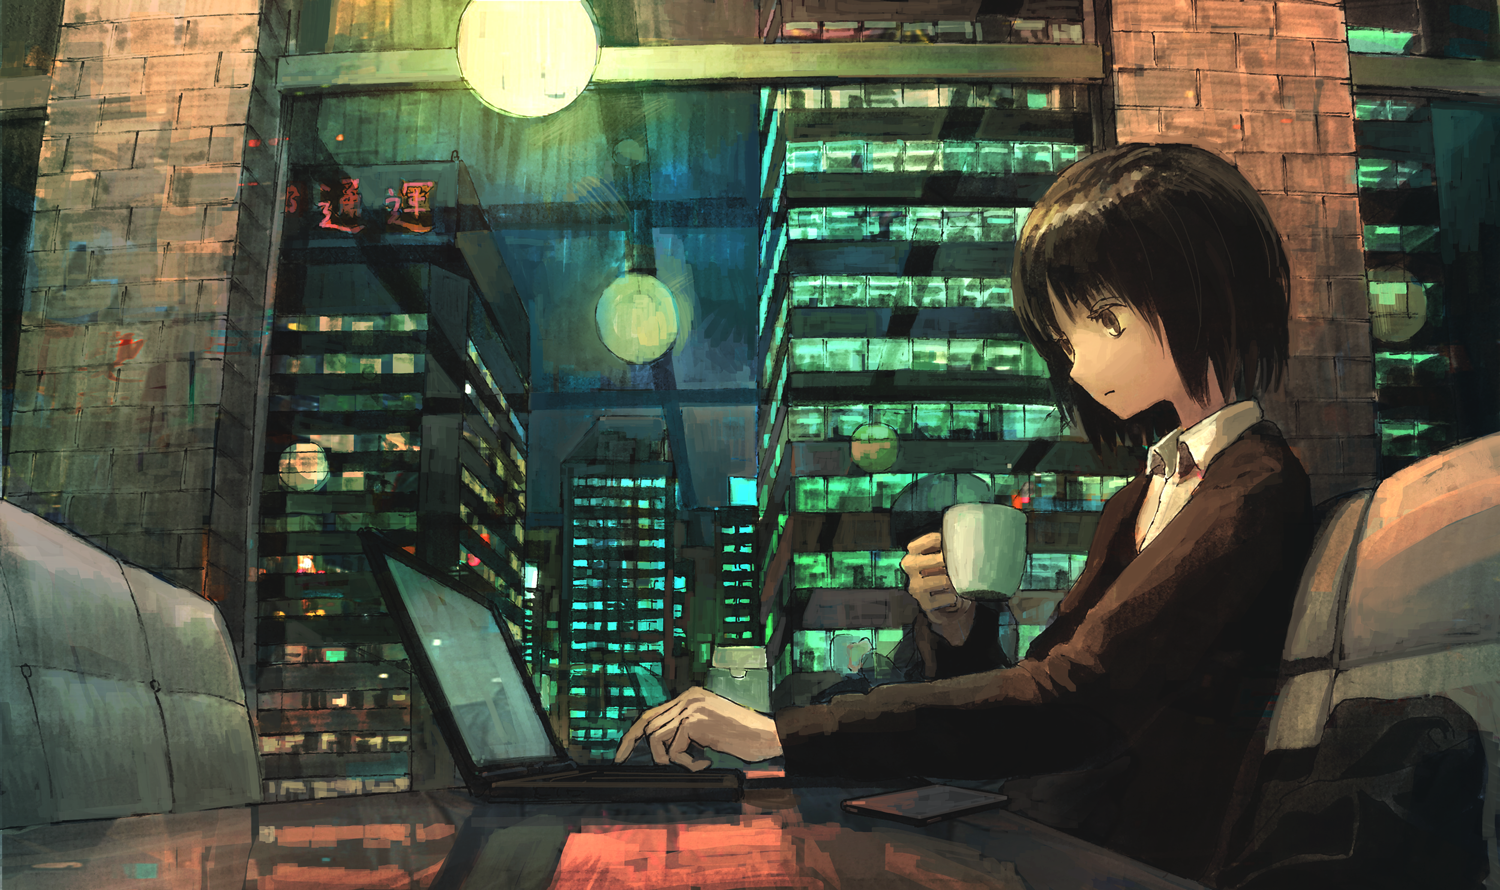 84 Mb Png - Anime Girl Work Office , HD Wallpaper & Backgrounds